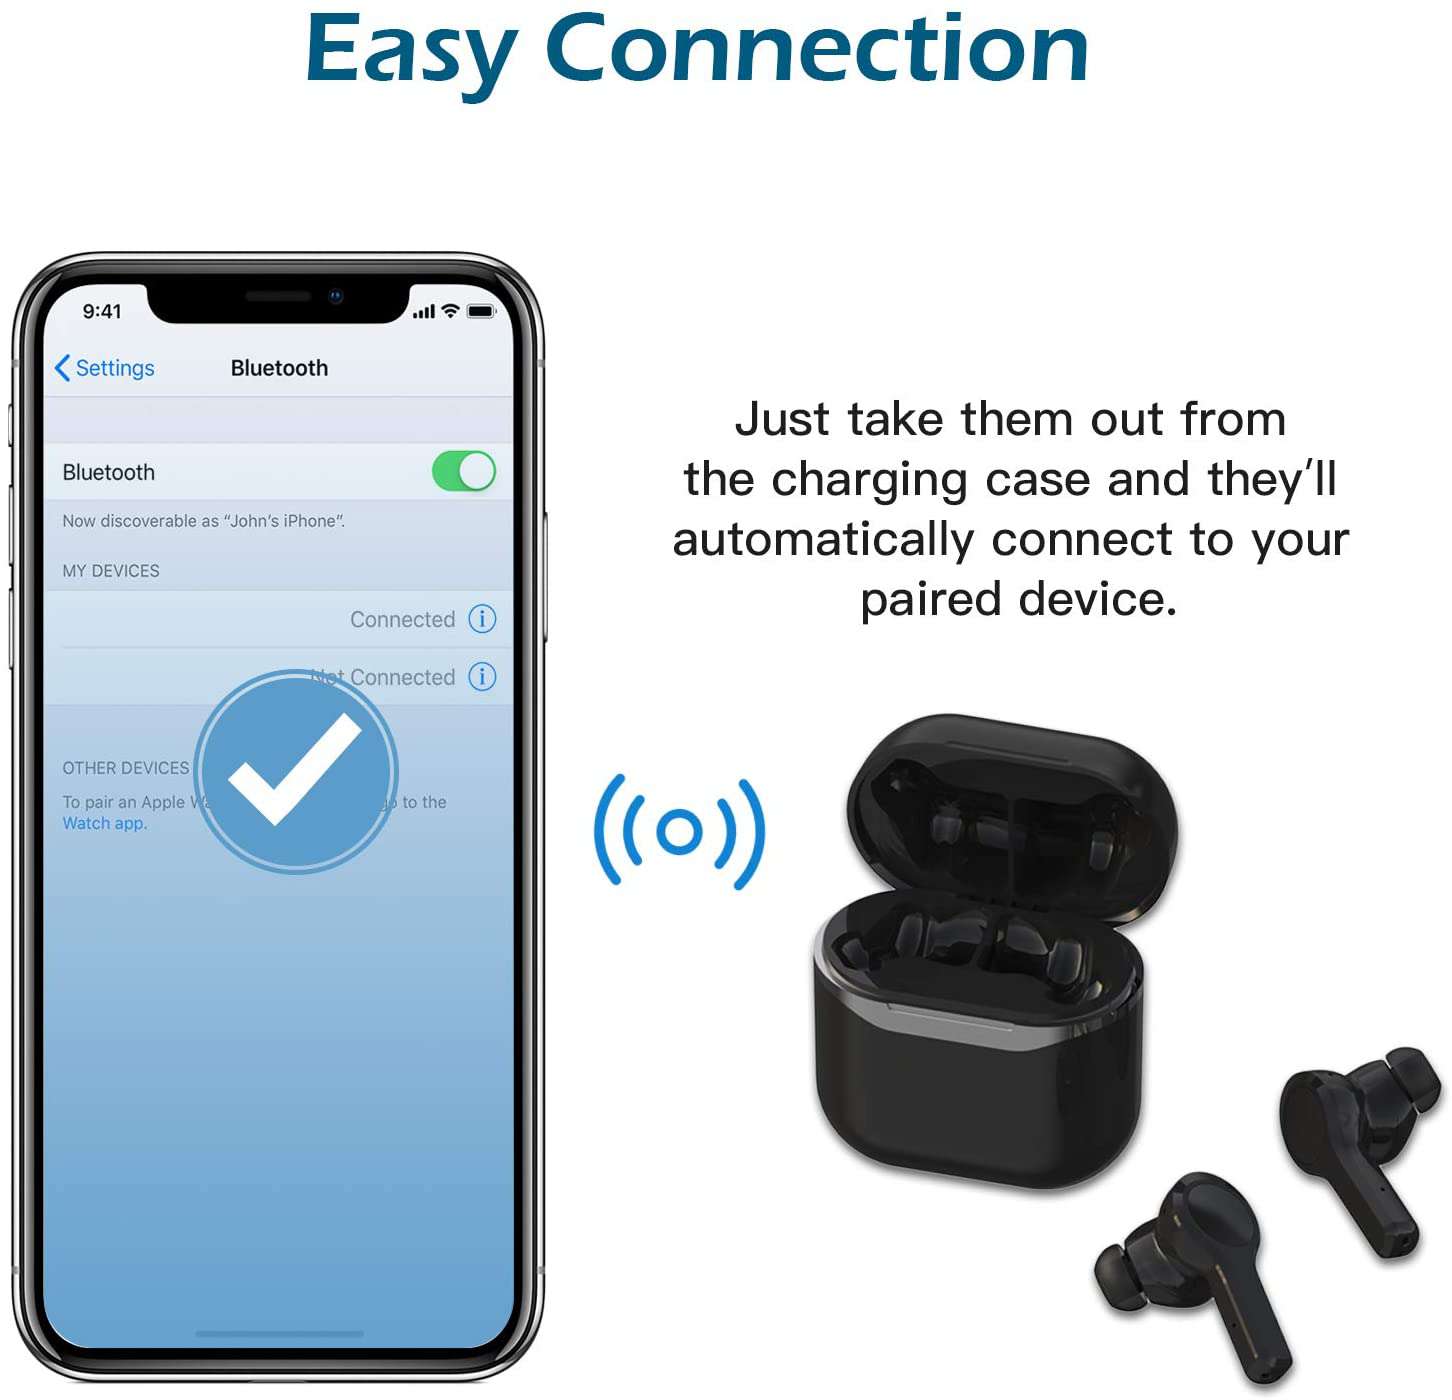 Take out the Bluetooth earphones from the charging case, and they will auto-connect to paired device